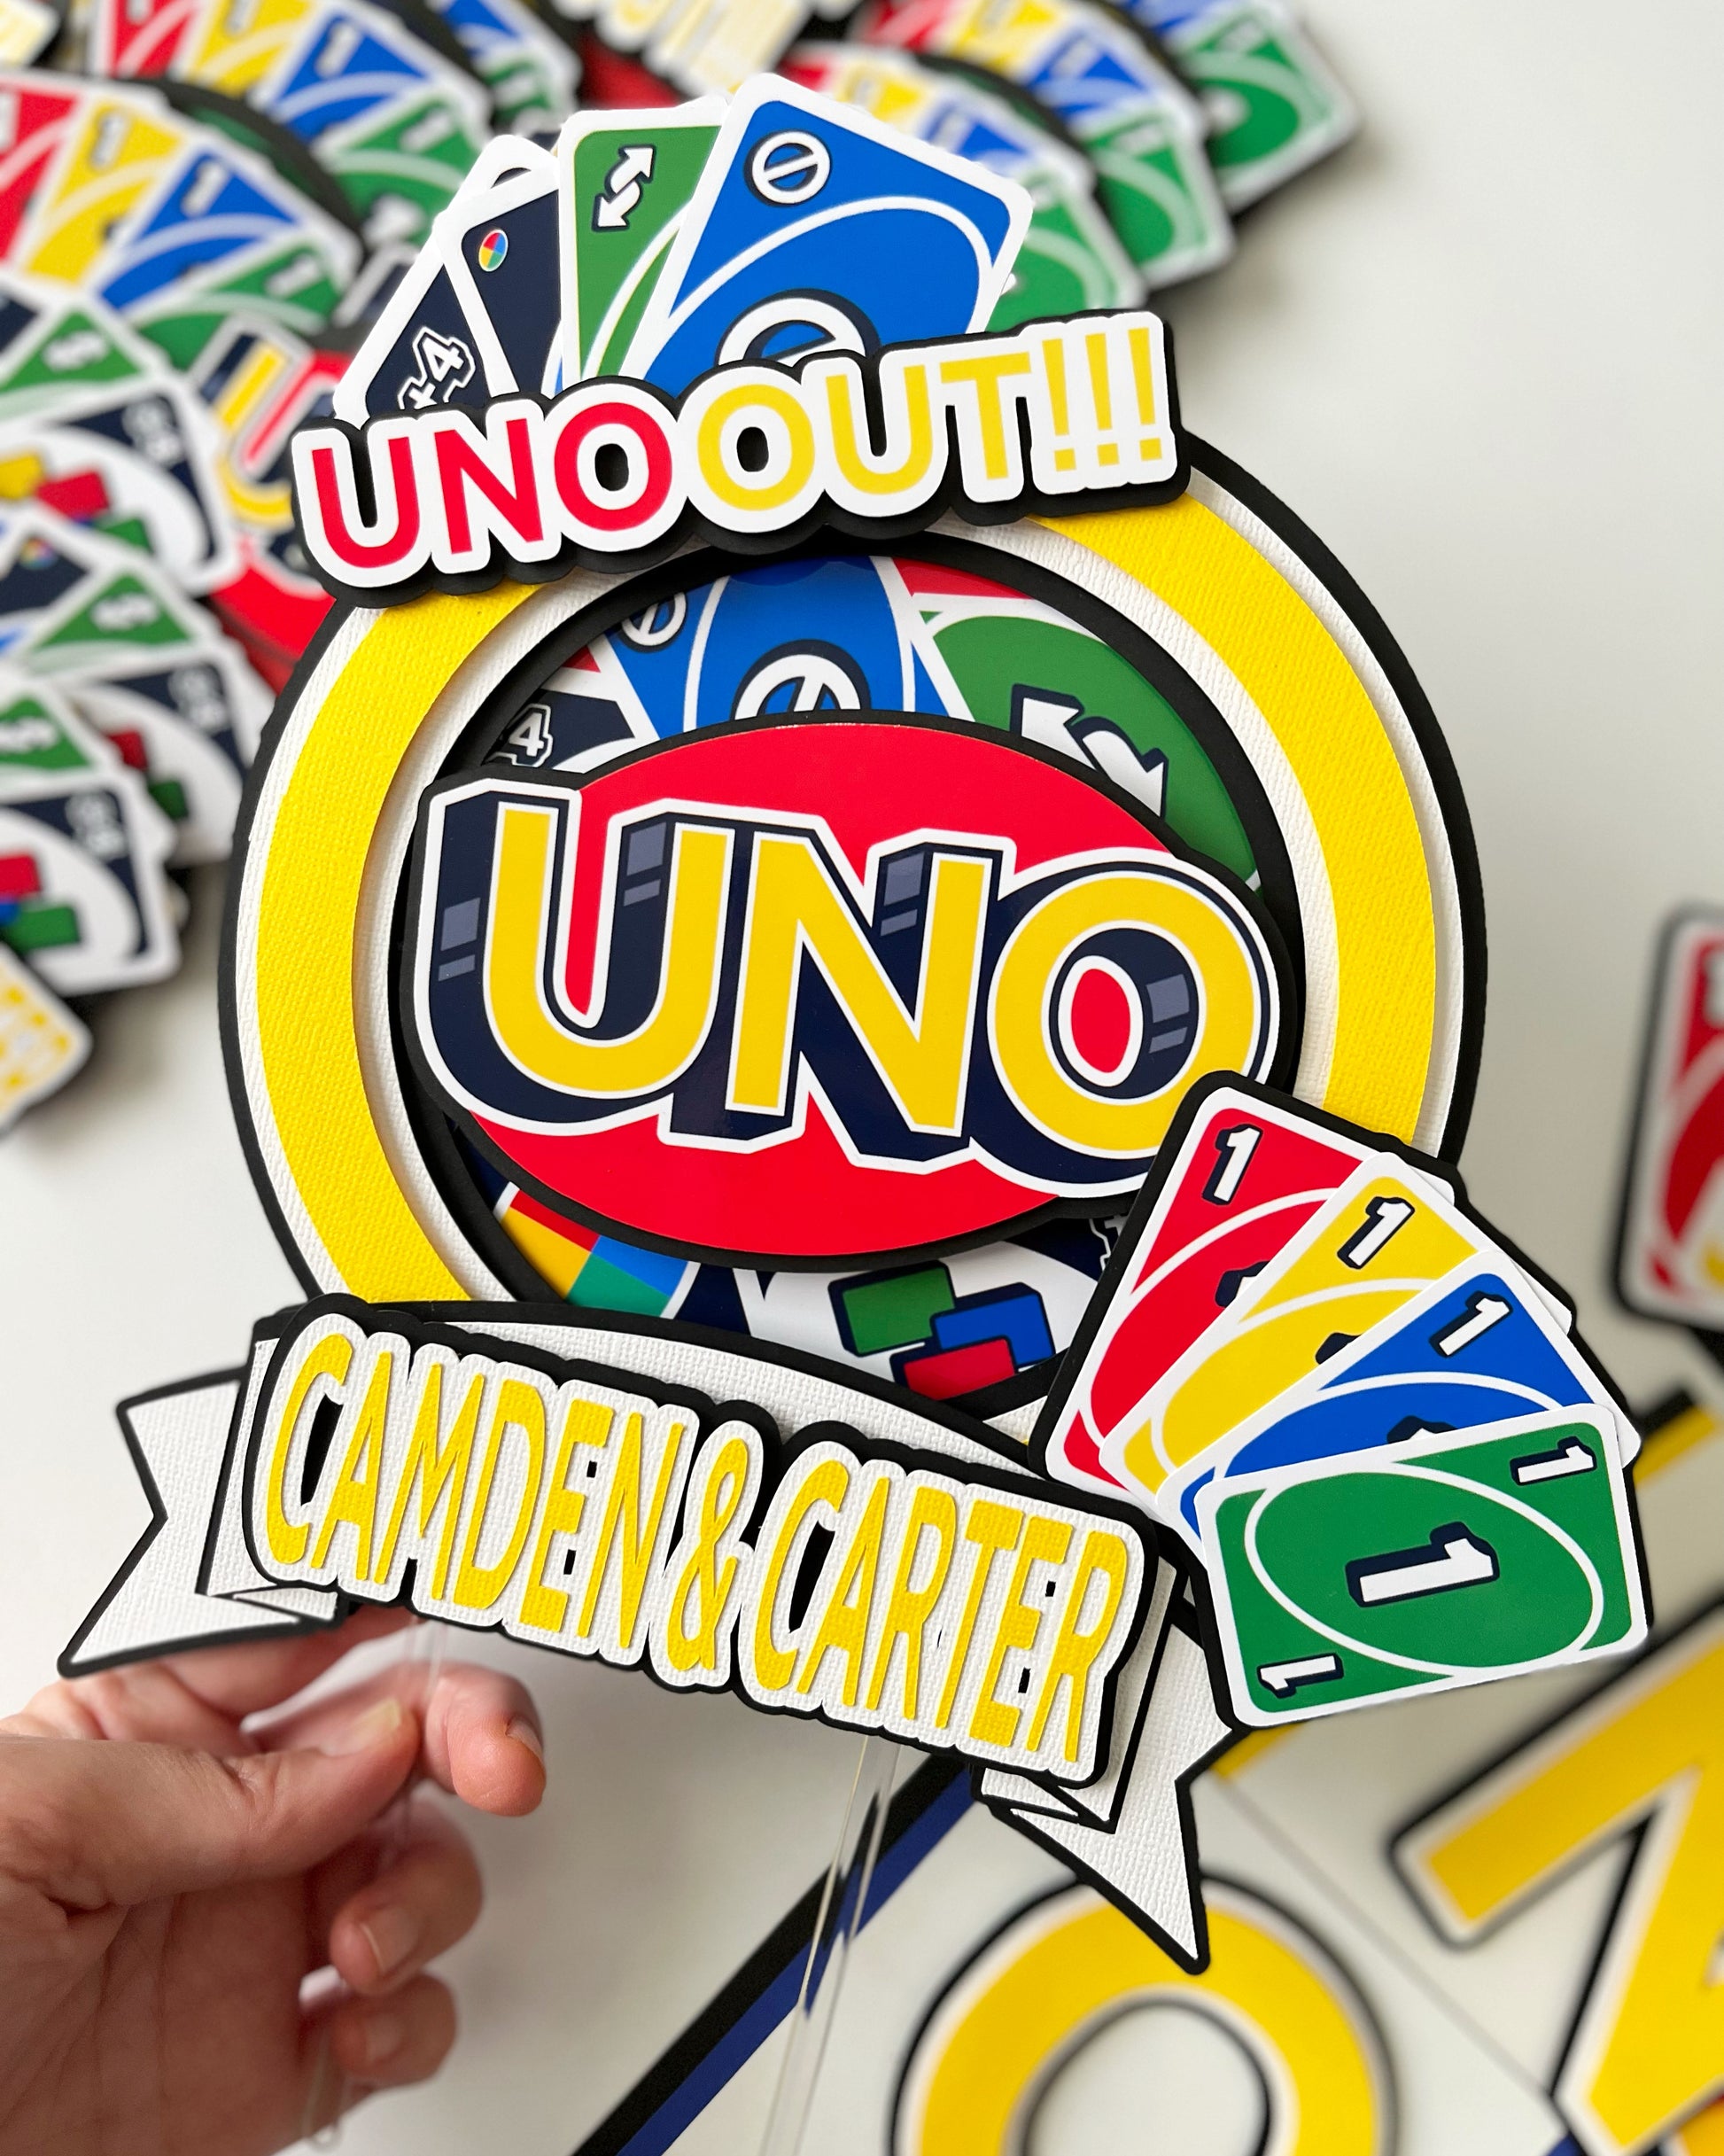 UNO Party Card Game